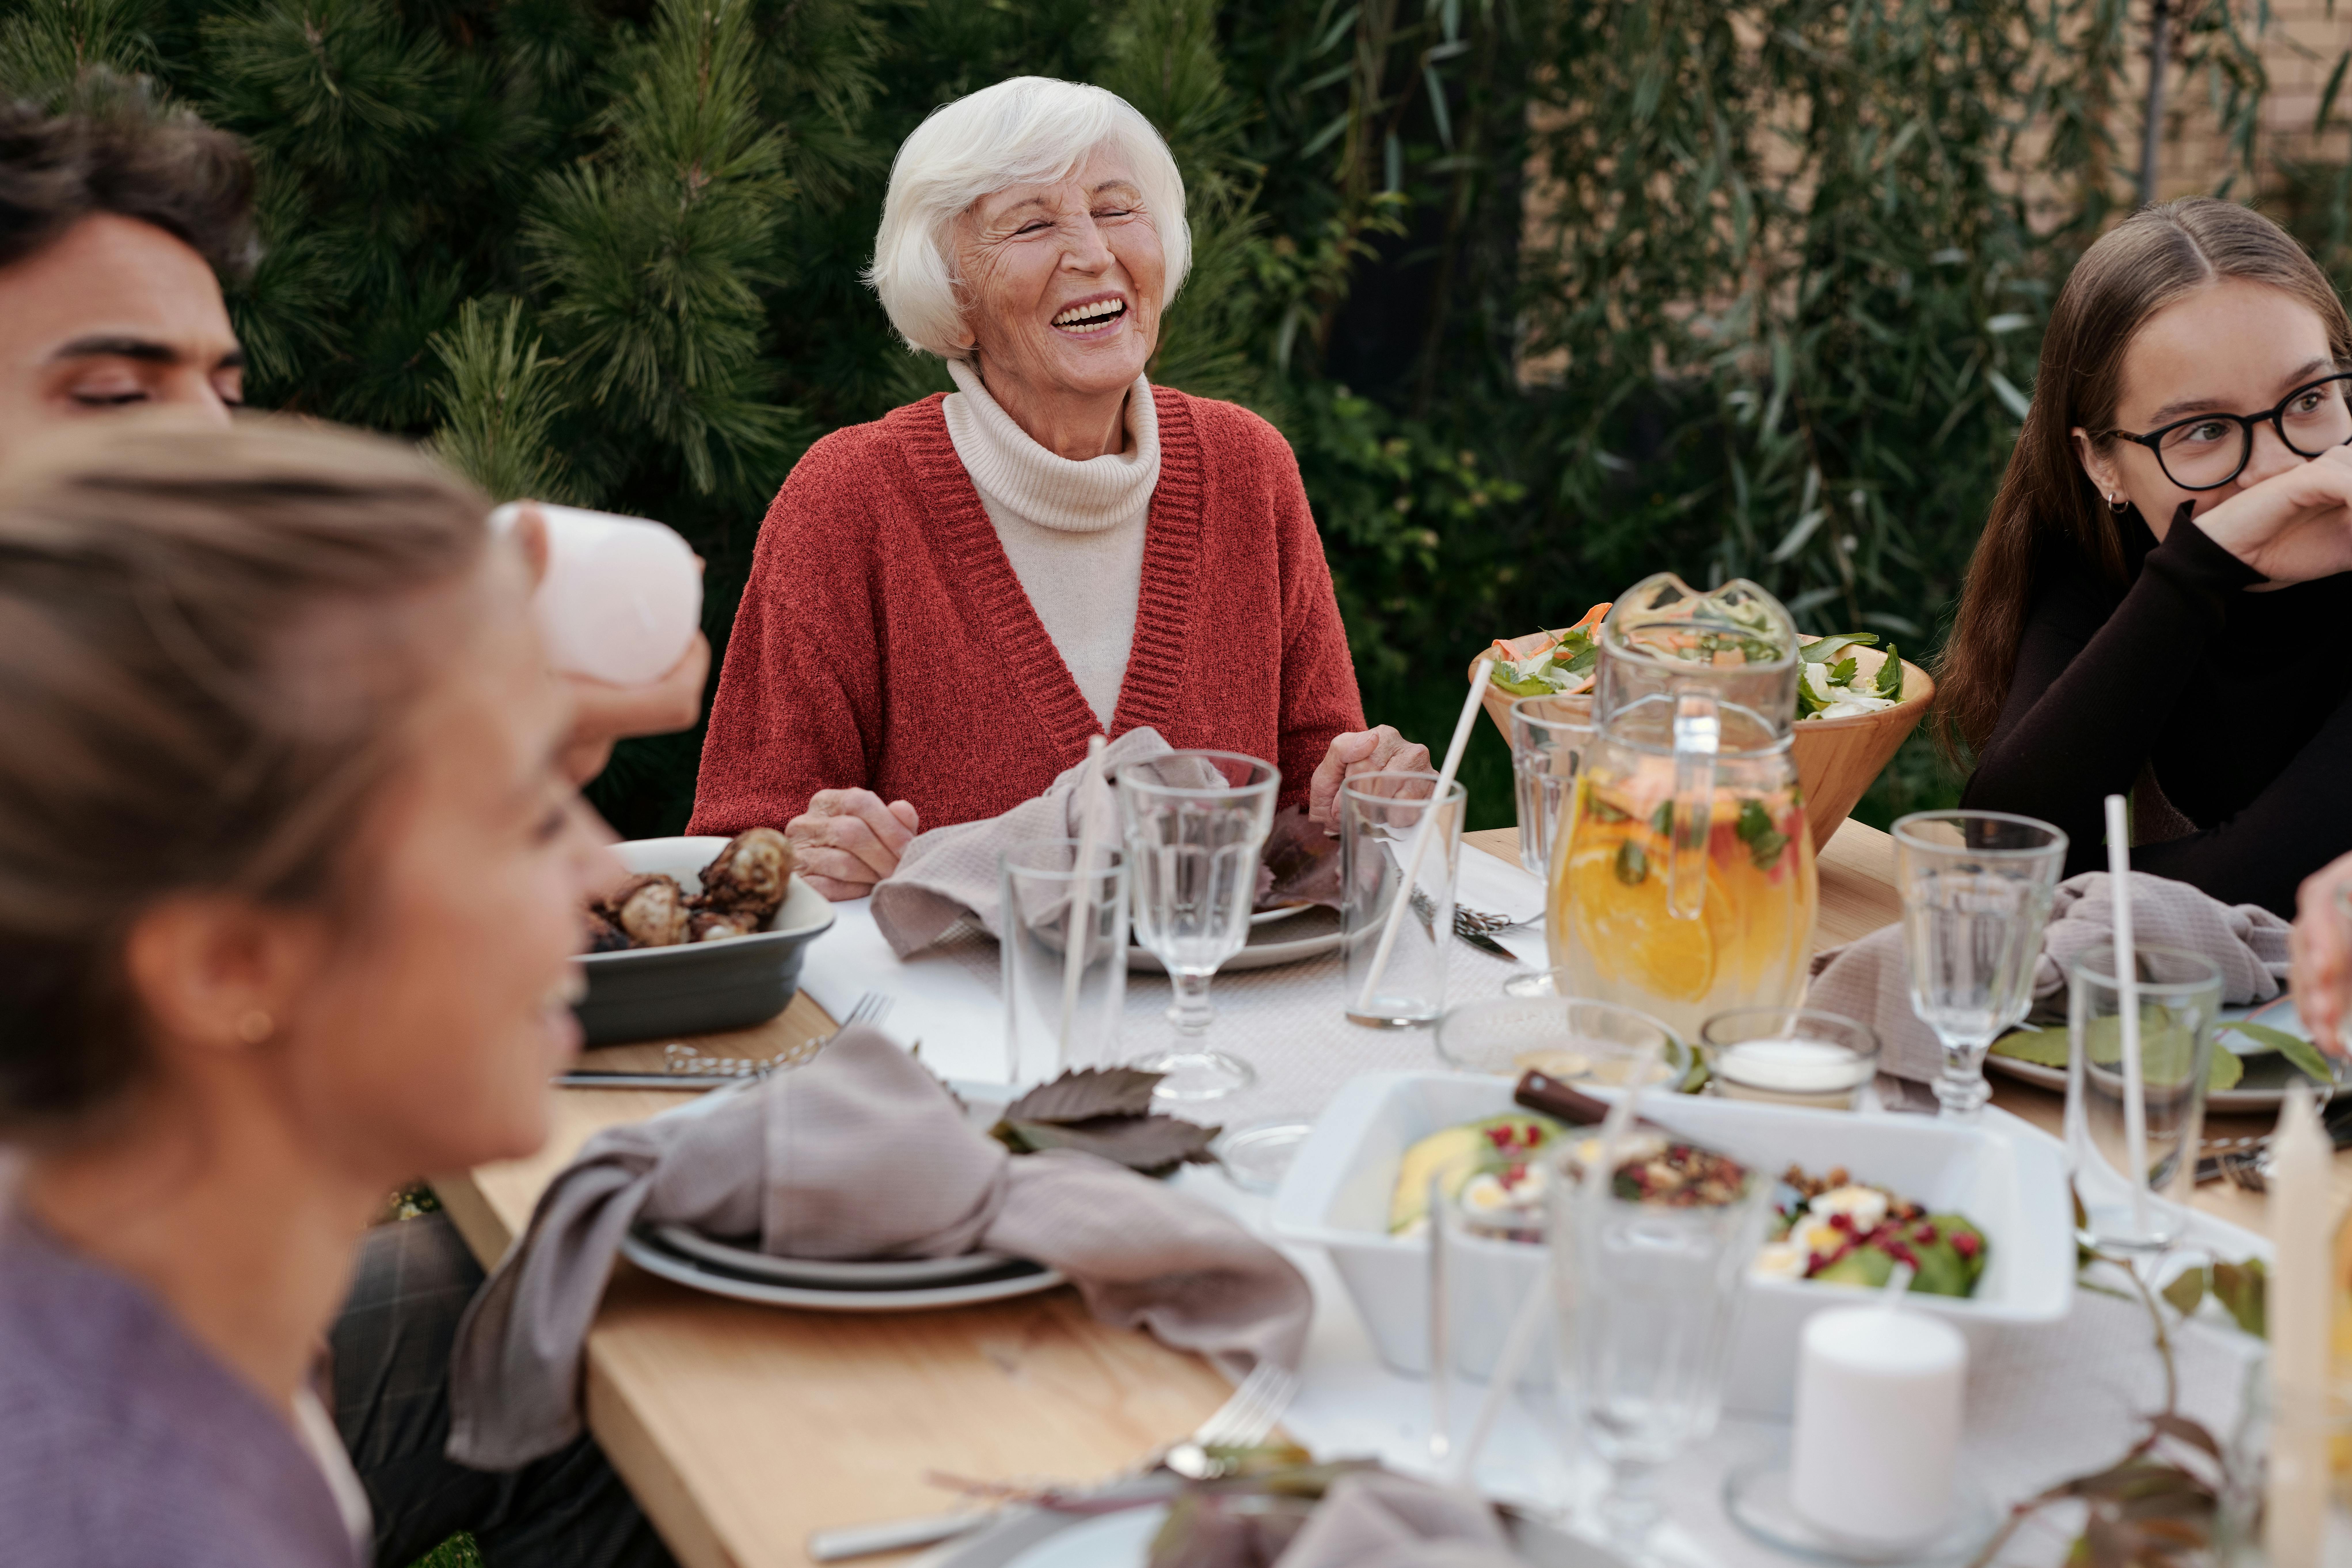 A happy elderly woman surrounded by friends and family | Source: Pexels